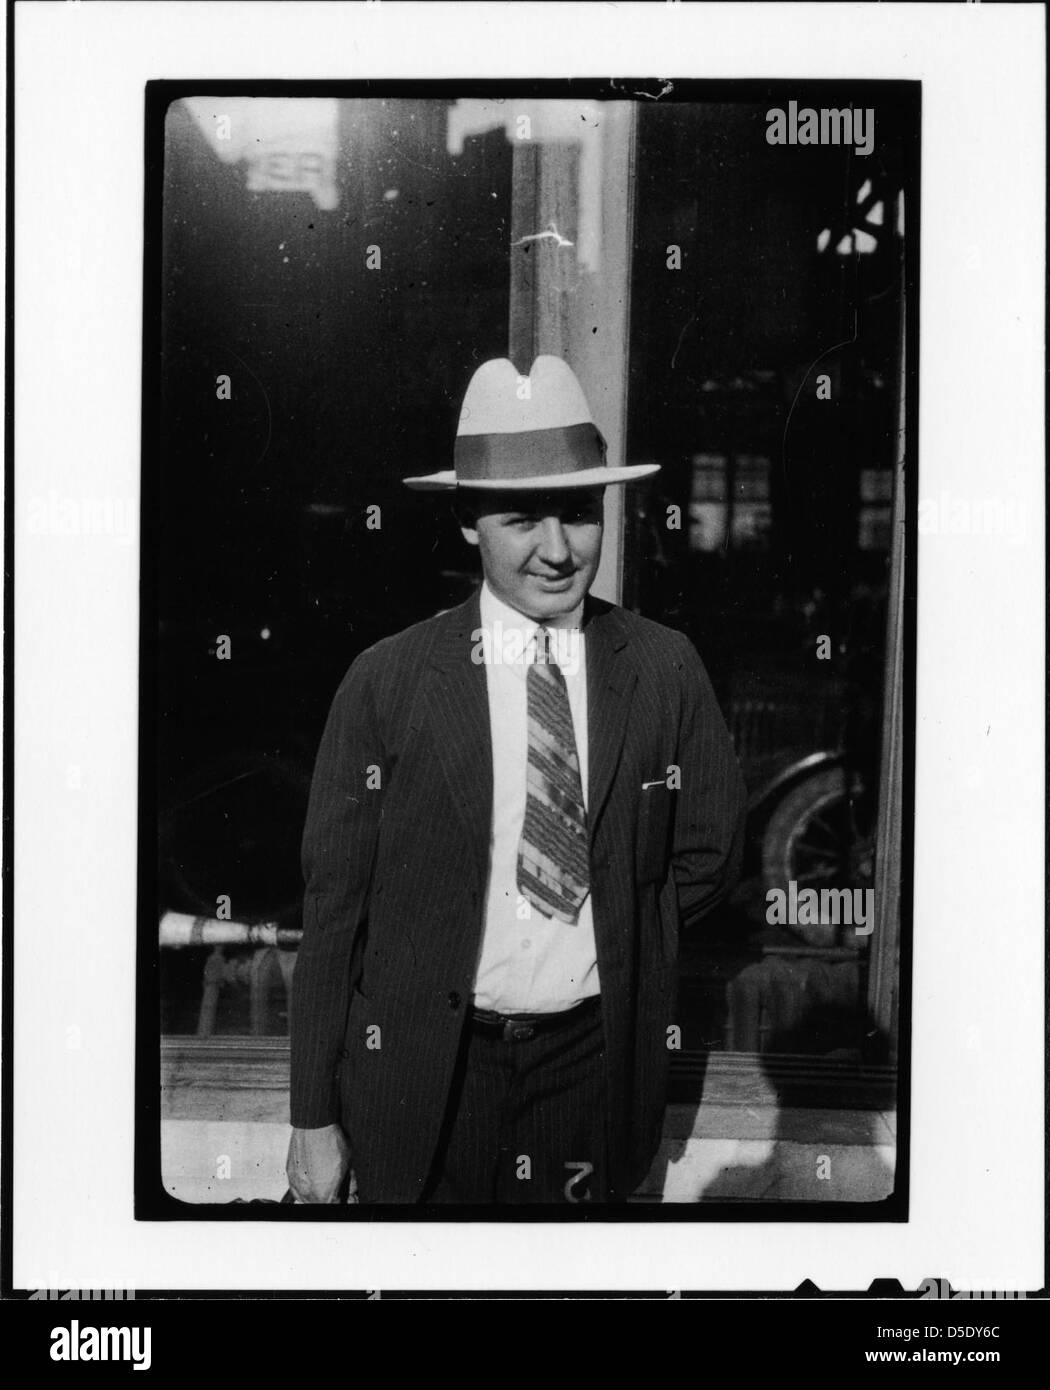 Tennessee v. John T. Scopes Trial: Unidentified man in front of auto dealership, Dayton, Tennessee. Stock Photo